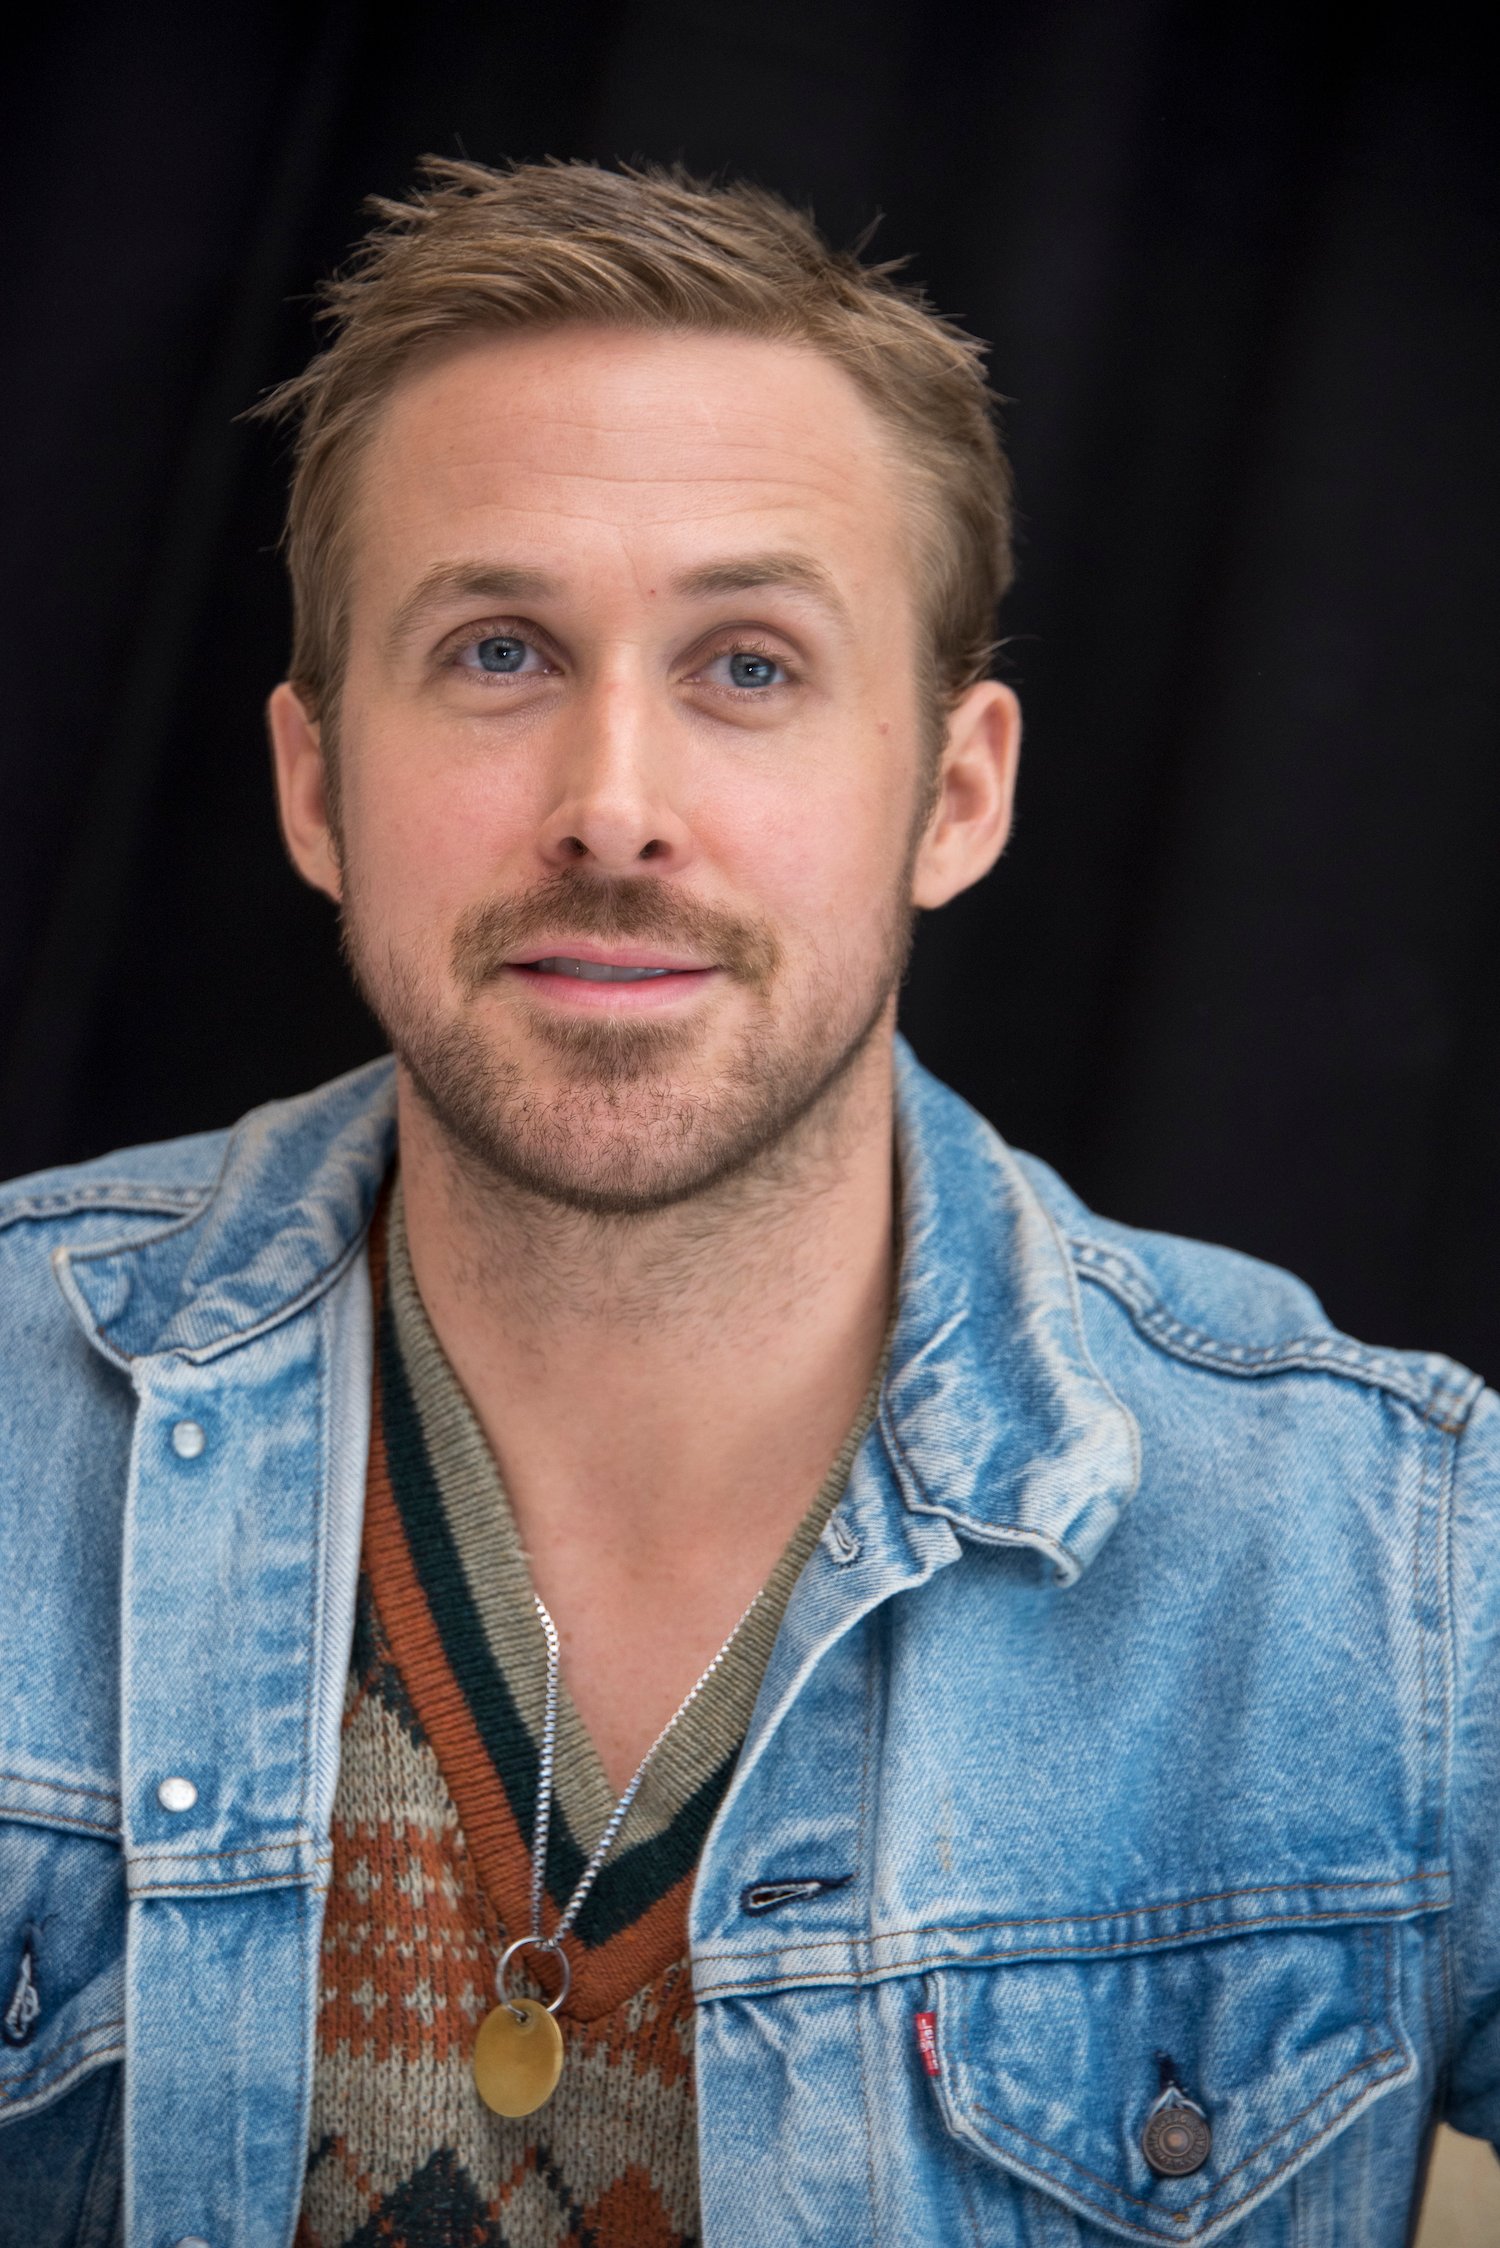 Ryan Gosling at a press conference for 'Blade Runner 2049'